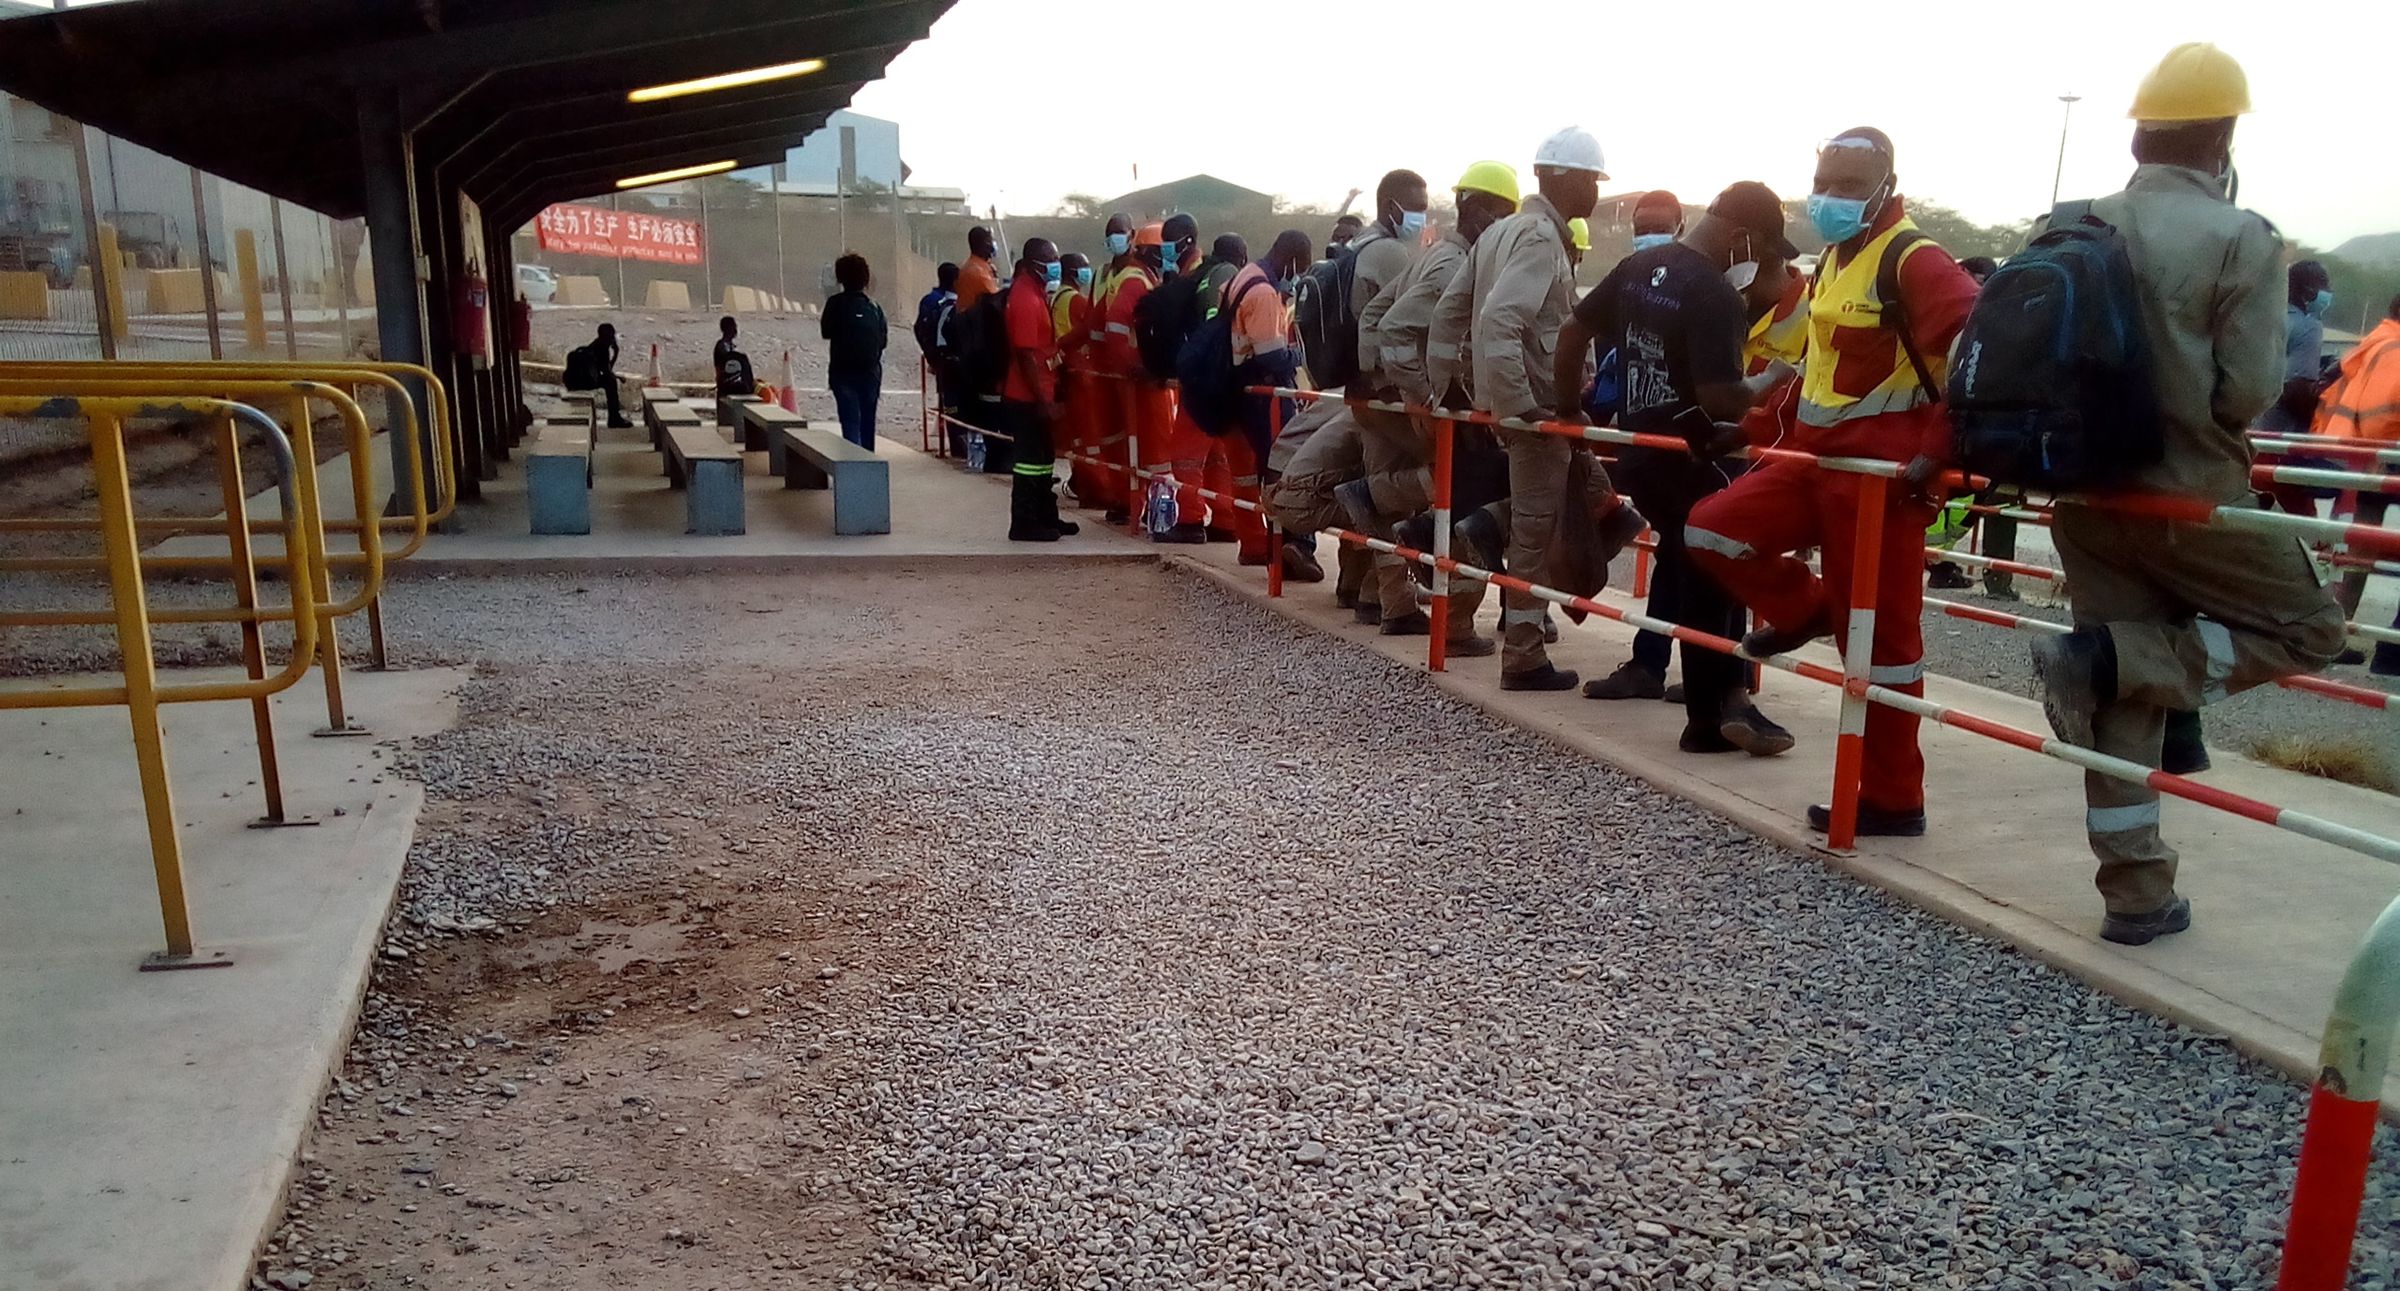 Industrial cobalt mine workers waiting for a company bus.